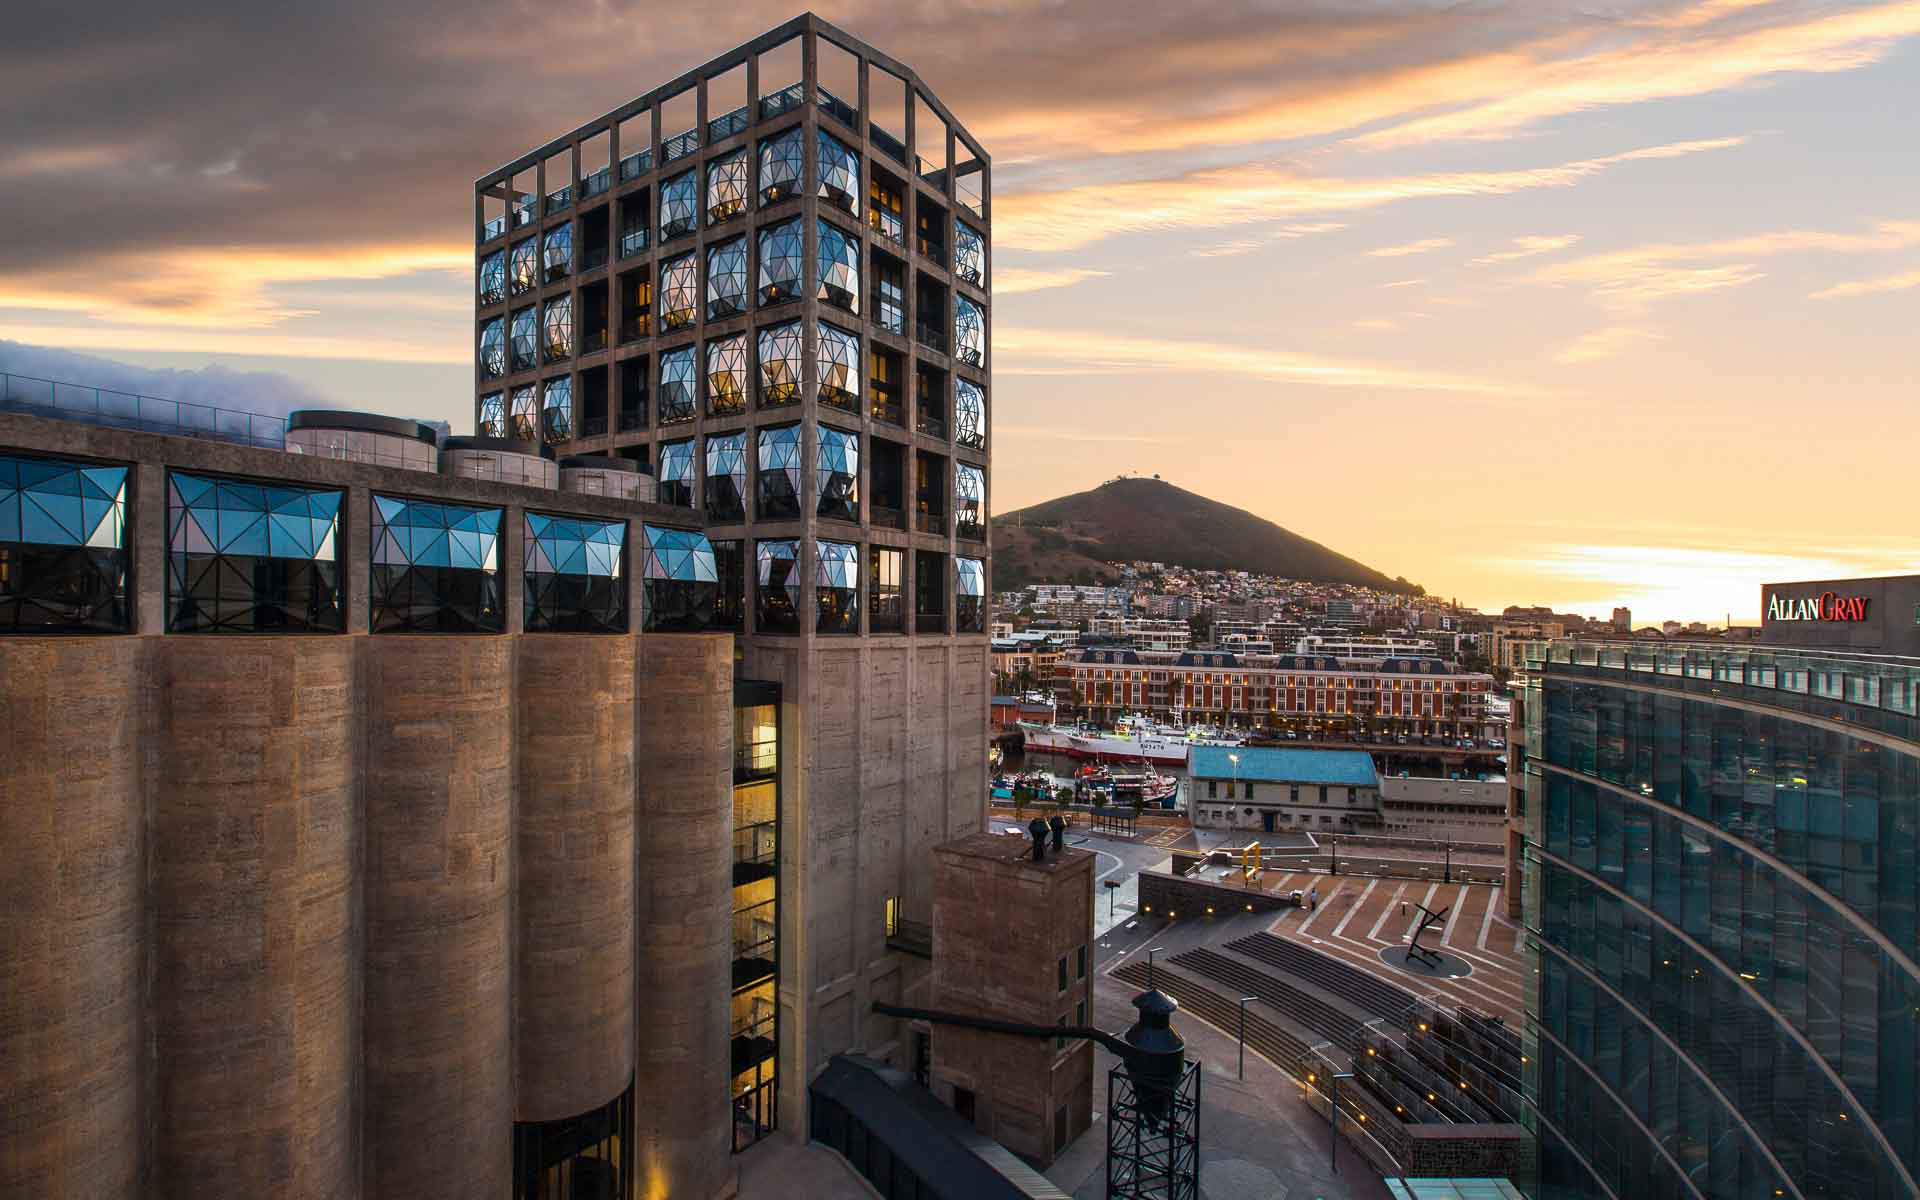 The Zeitz Museum of Contemporary African Art exterior during sunset – one of the top art galleries in Cape Town.